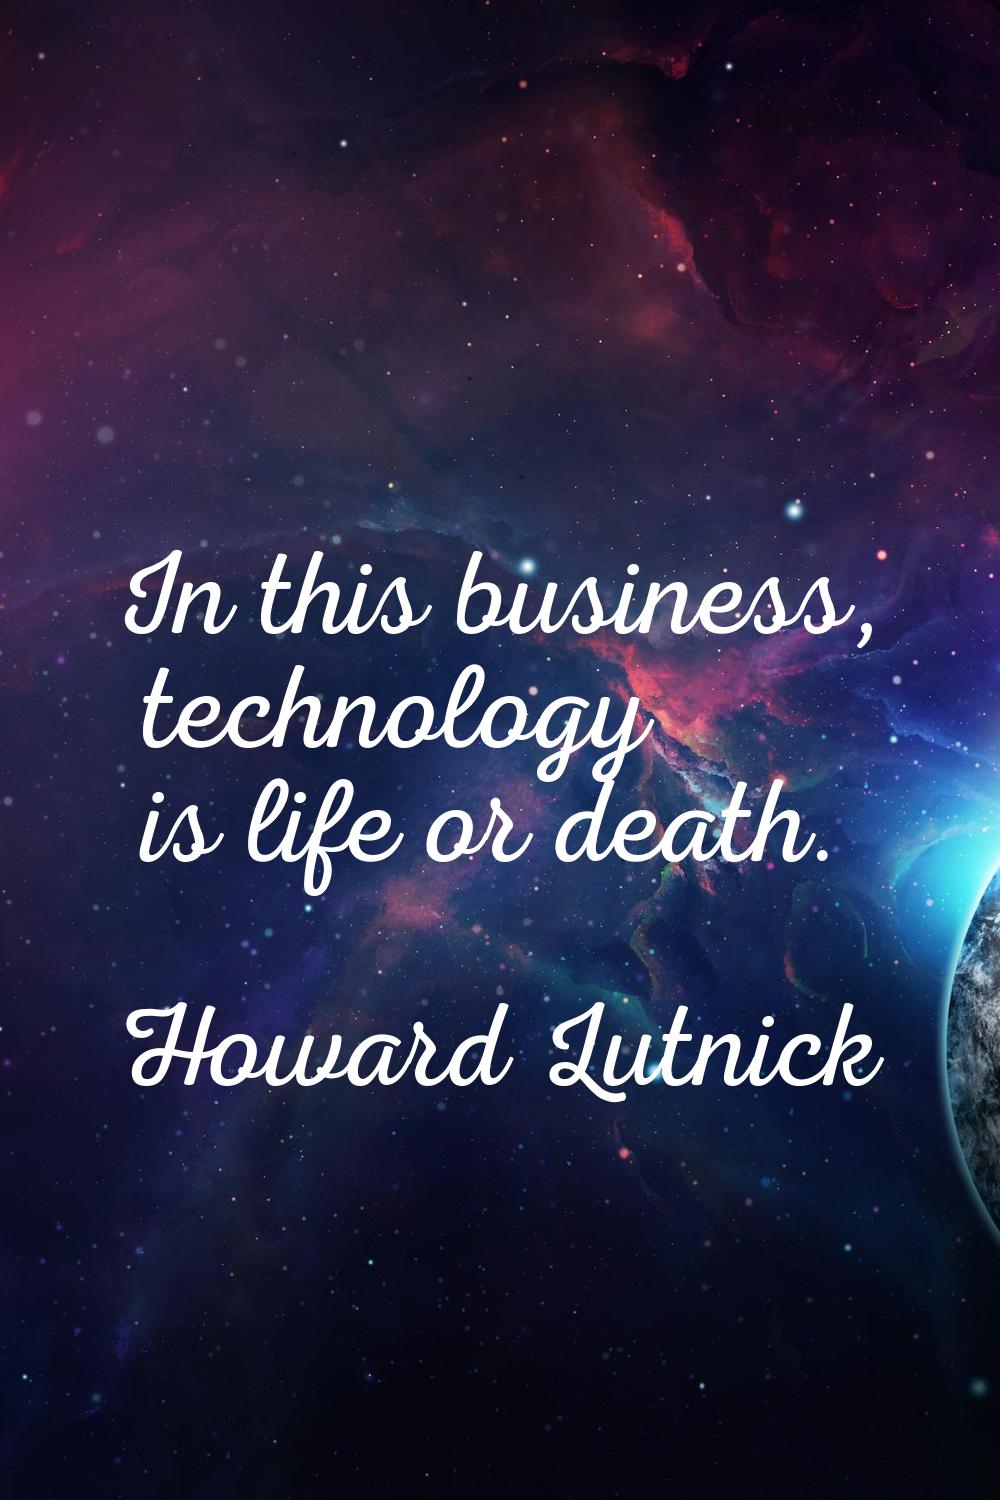 In this business, technology is life or death.